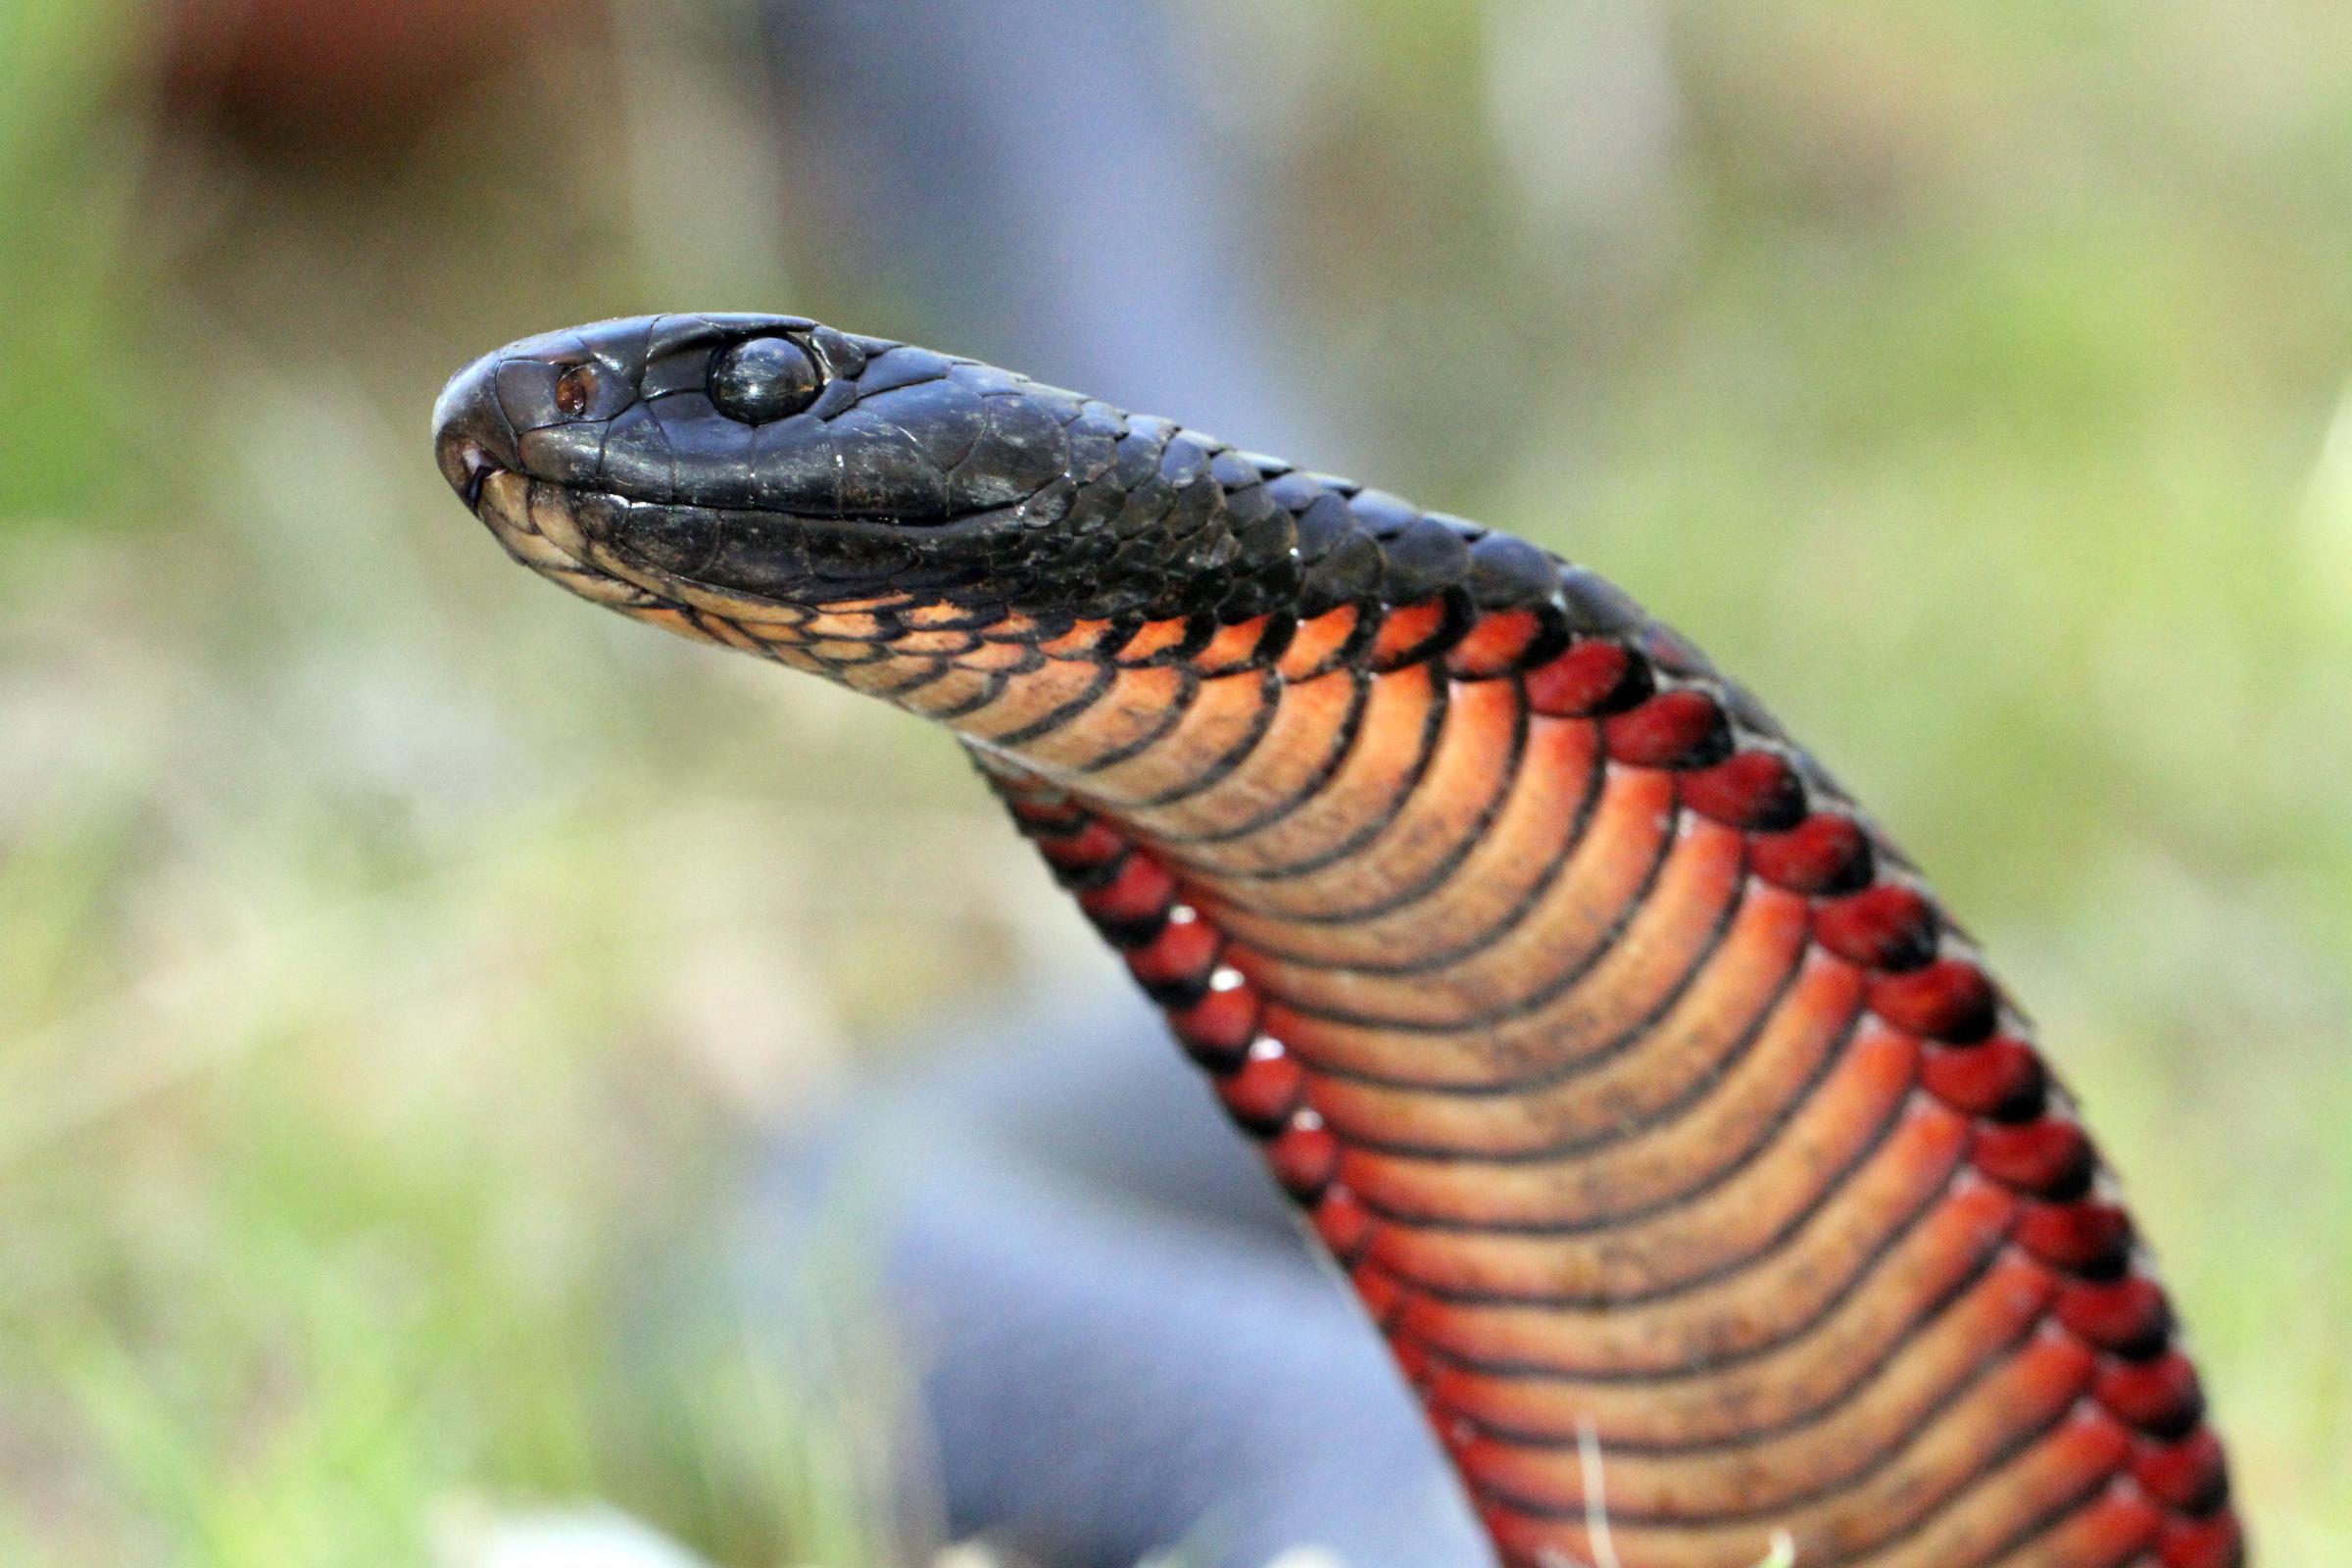 A red-bellied black snake | Source: Commons.wikimedia